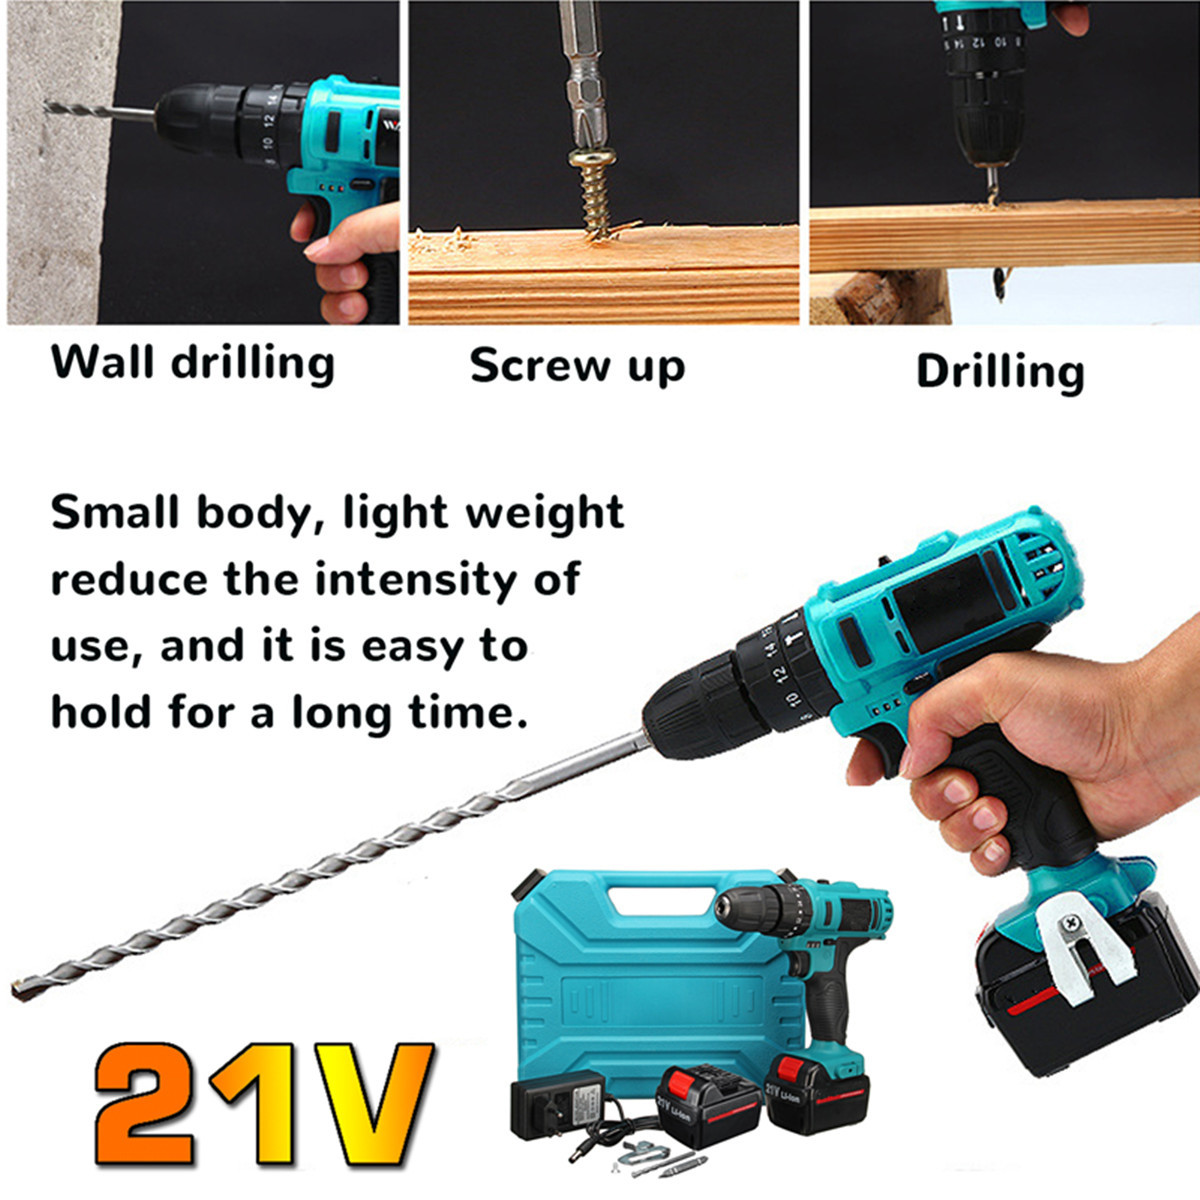 21V-Cordless-Impact-Power-Drill-Electric-Screwdriver-Set-with-2-Li-ion-Batteries-1372018-2